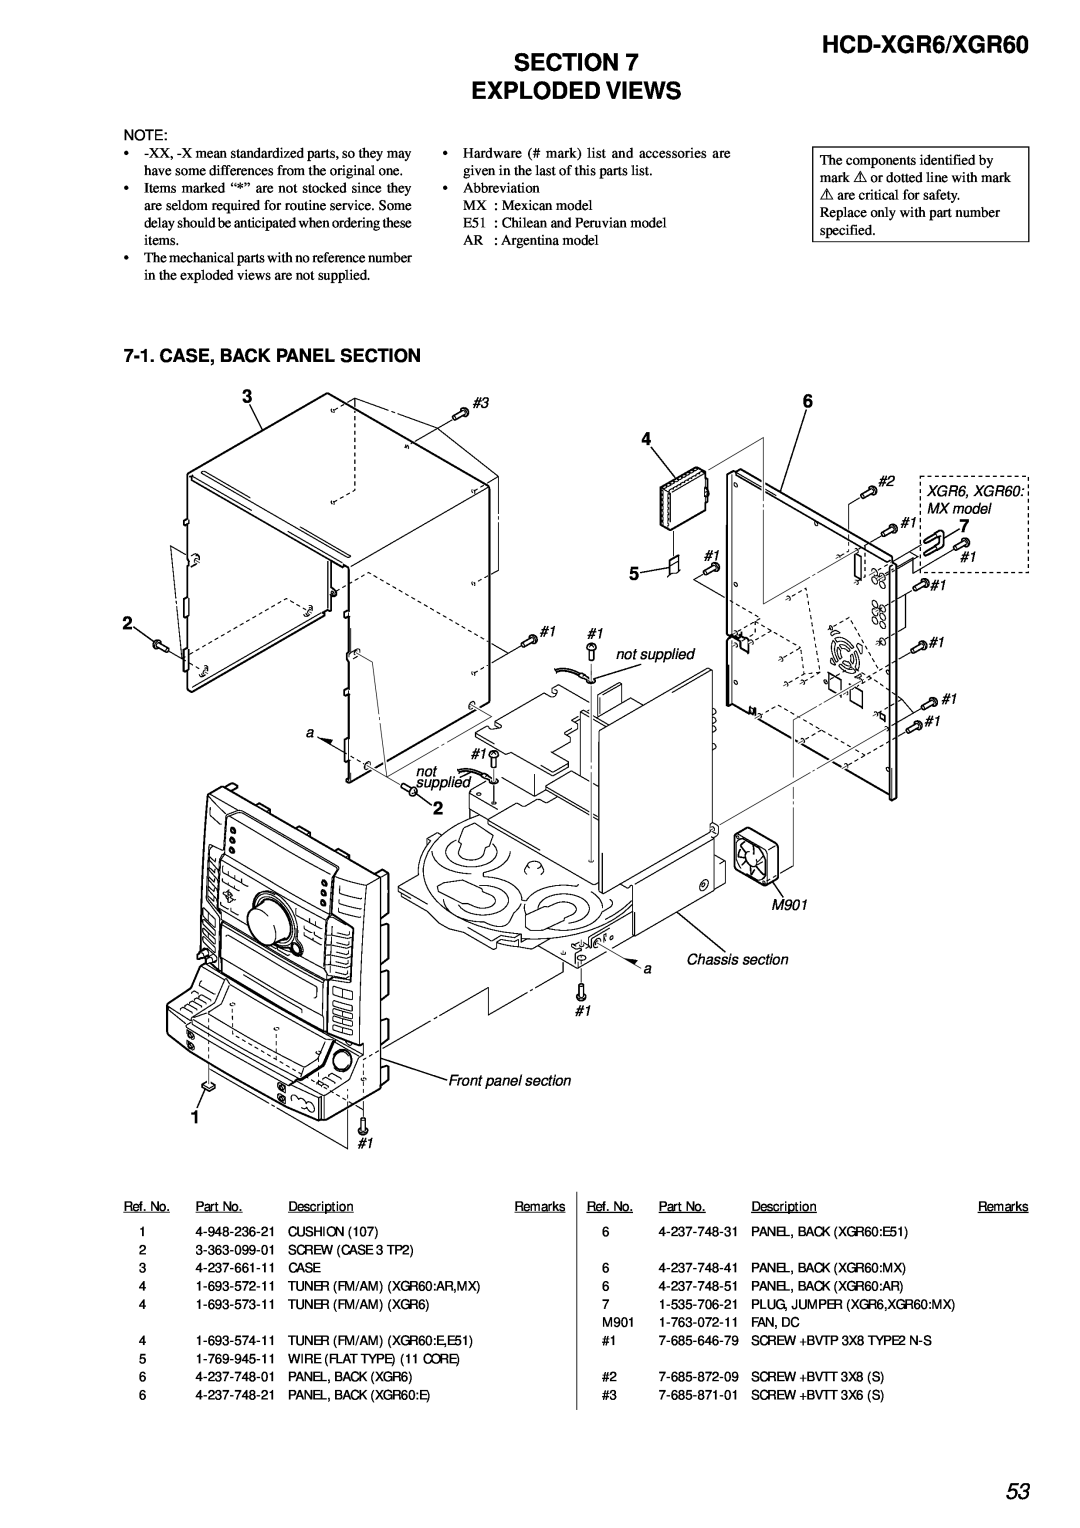 Sony HCD-XGR60 specifications HCD-XGR6/XGR60 SECTION EXPLODED VIEWS, Case, Back Panel Section 